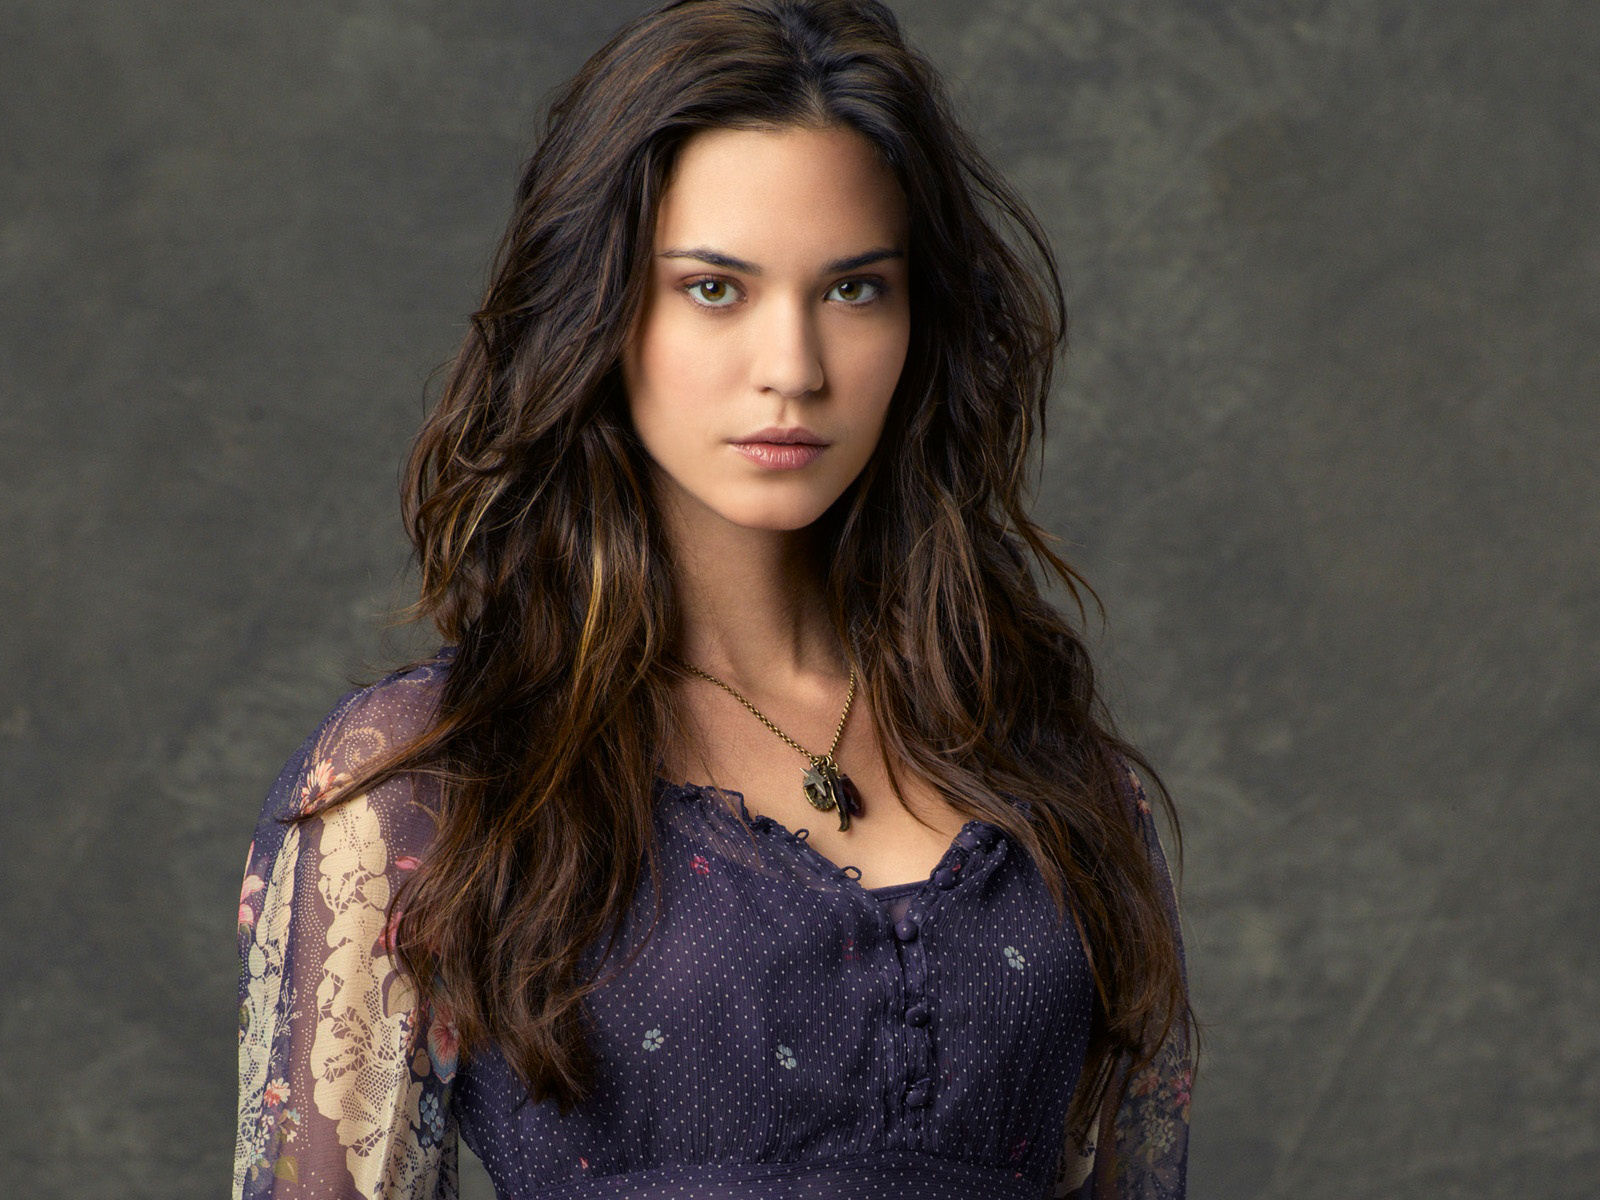 Odette Annable Cast as Reign for “Supergirl” Season 3